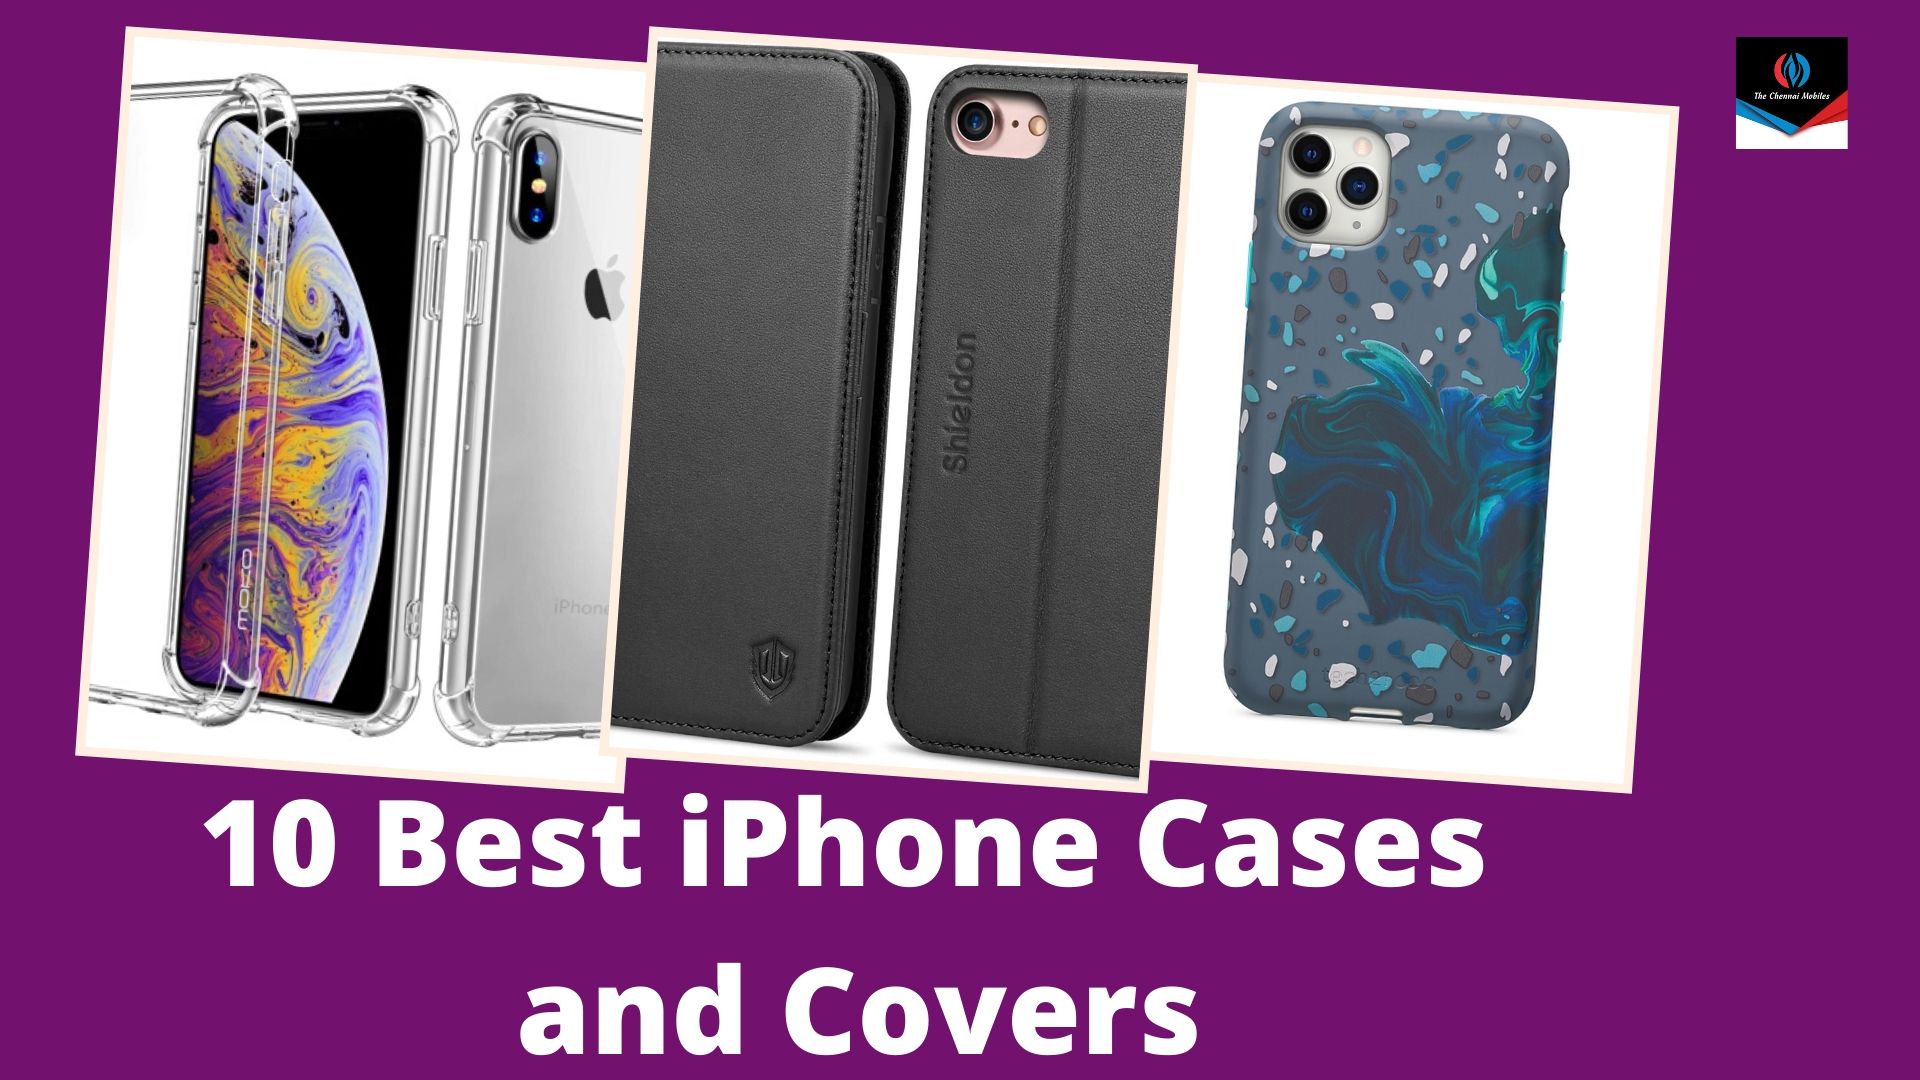 10 Best iPhone Cases and Covers